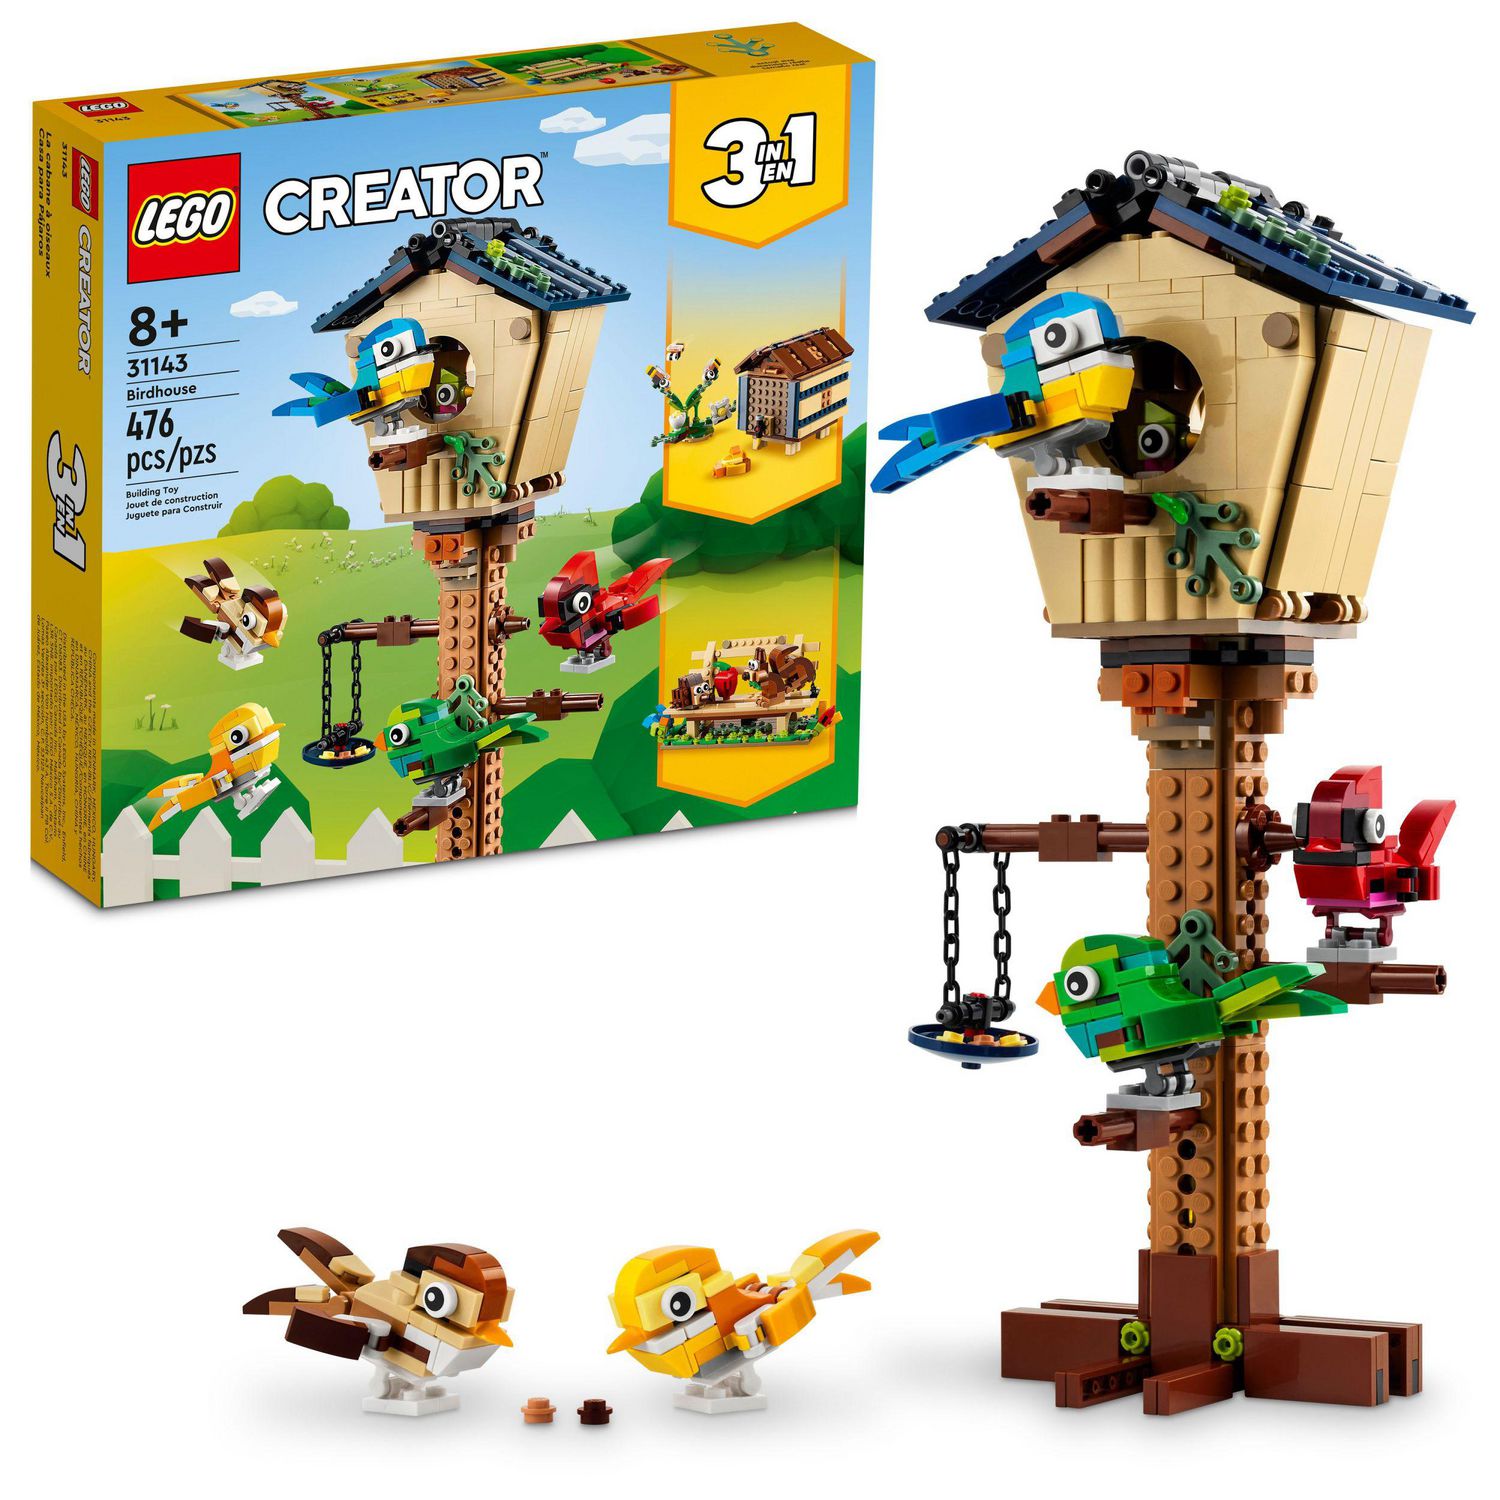 Set,　Beehive　Ages　Colorful　and　Idea,　for　Pieces,　Animal　Kids　476　31143,　Includes　Hedgehog　Birds　Ages　Years　Gift　to　Creator　Set,　Toy　Over,　Forest　Birdhouse　Building　Toys　Figures,　to　3in1　LEGO　8+